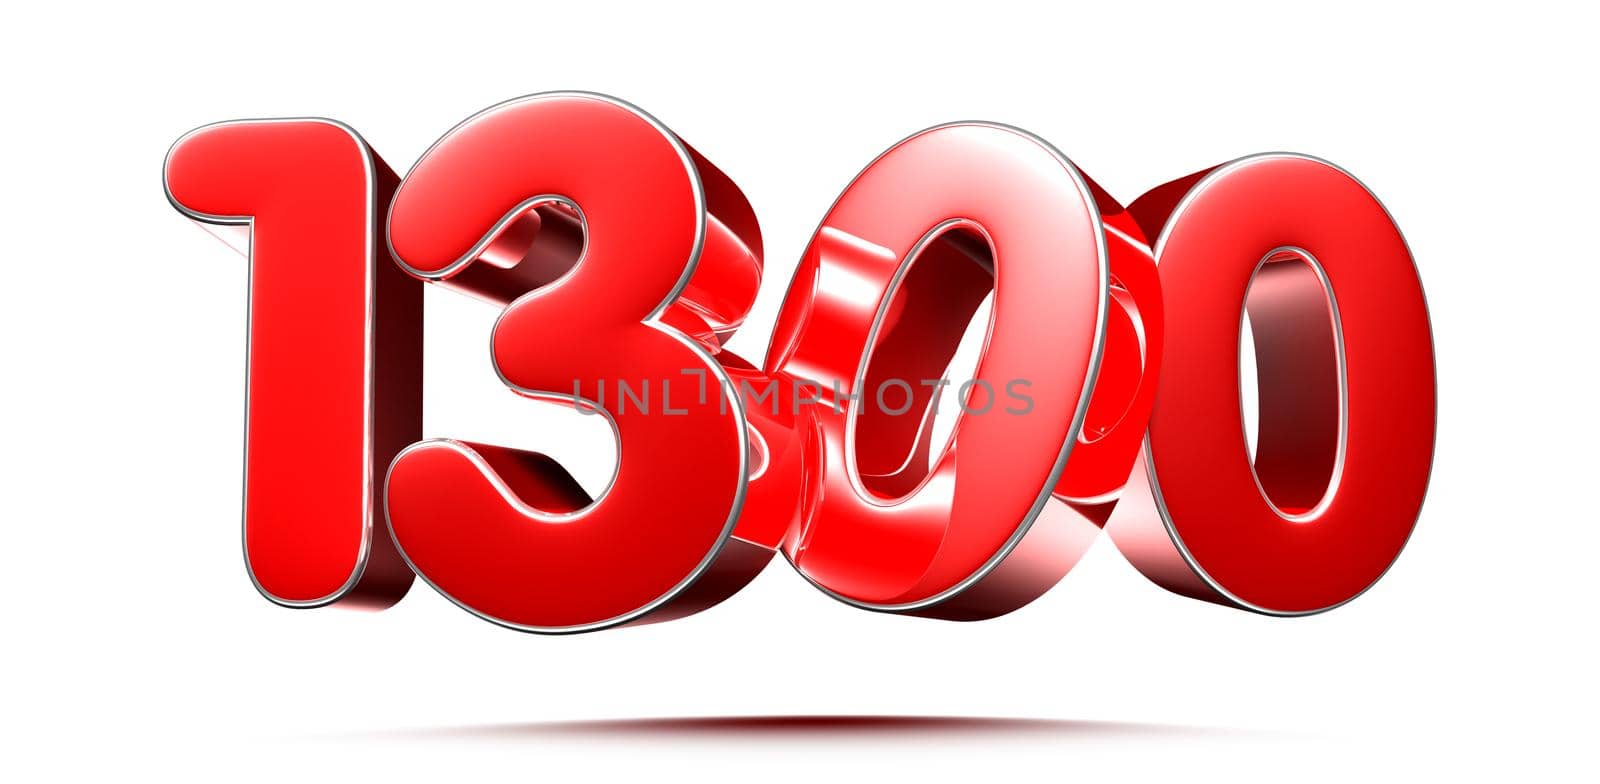 Rounded red numbers 1300 on white background 3D illustration with clipping path by thitimontoyai